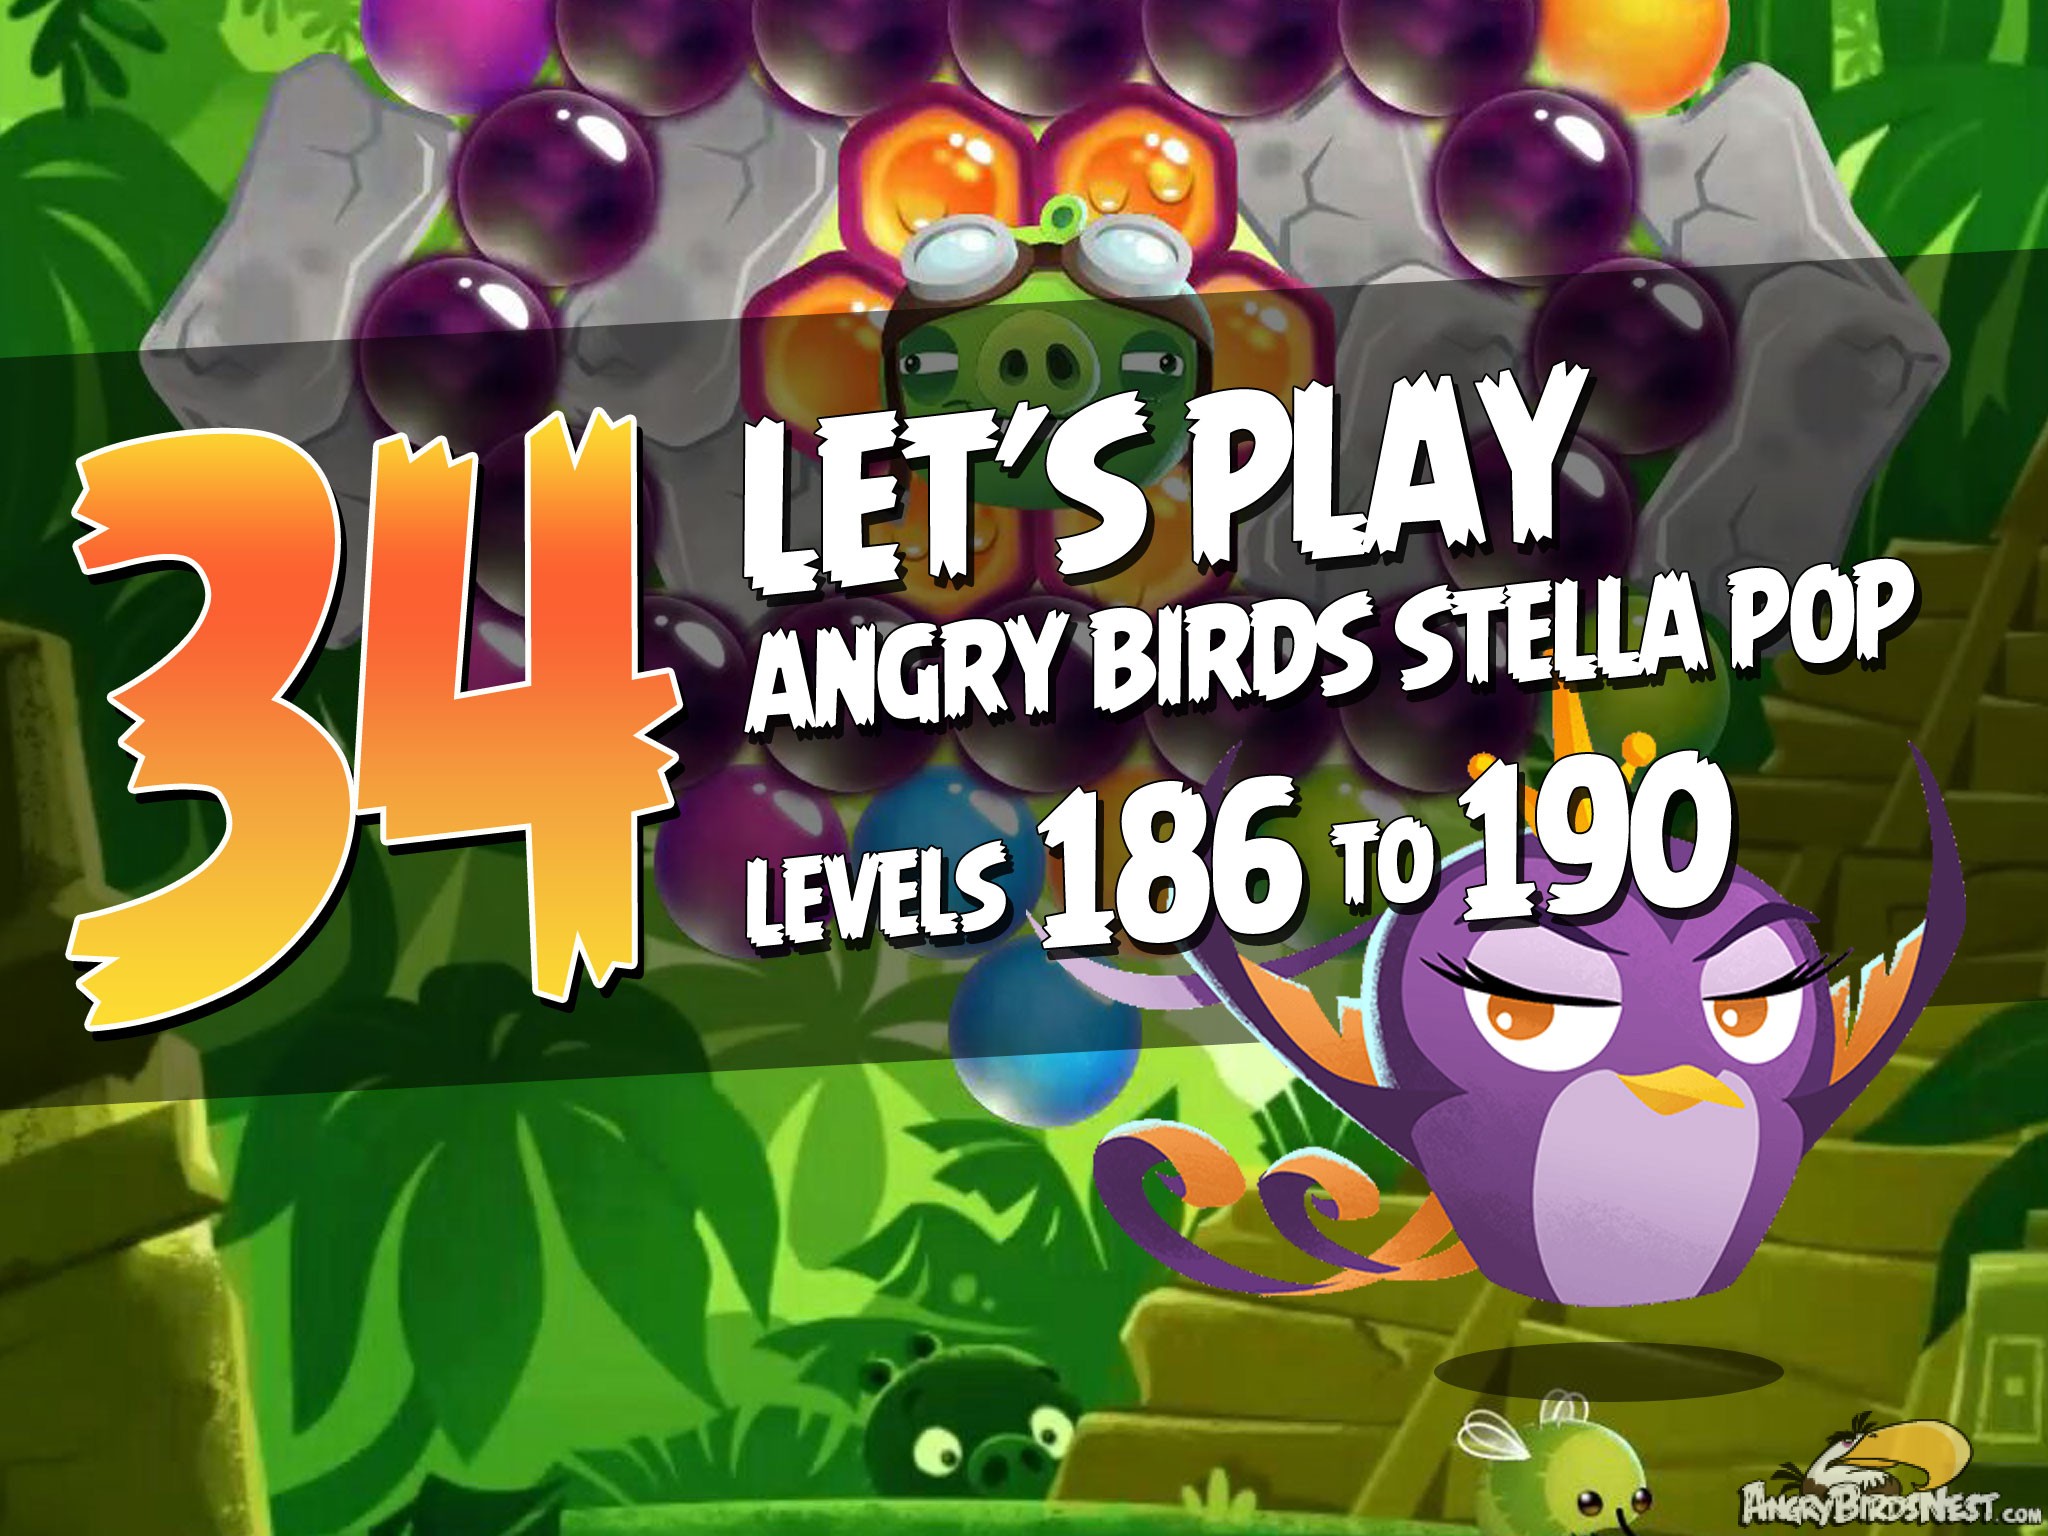 Angry Birds Stella Pop Featured Image Levels 186 thru 190